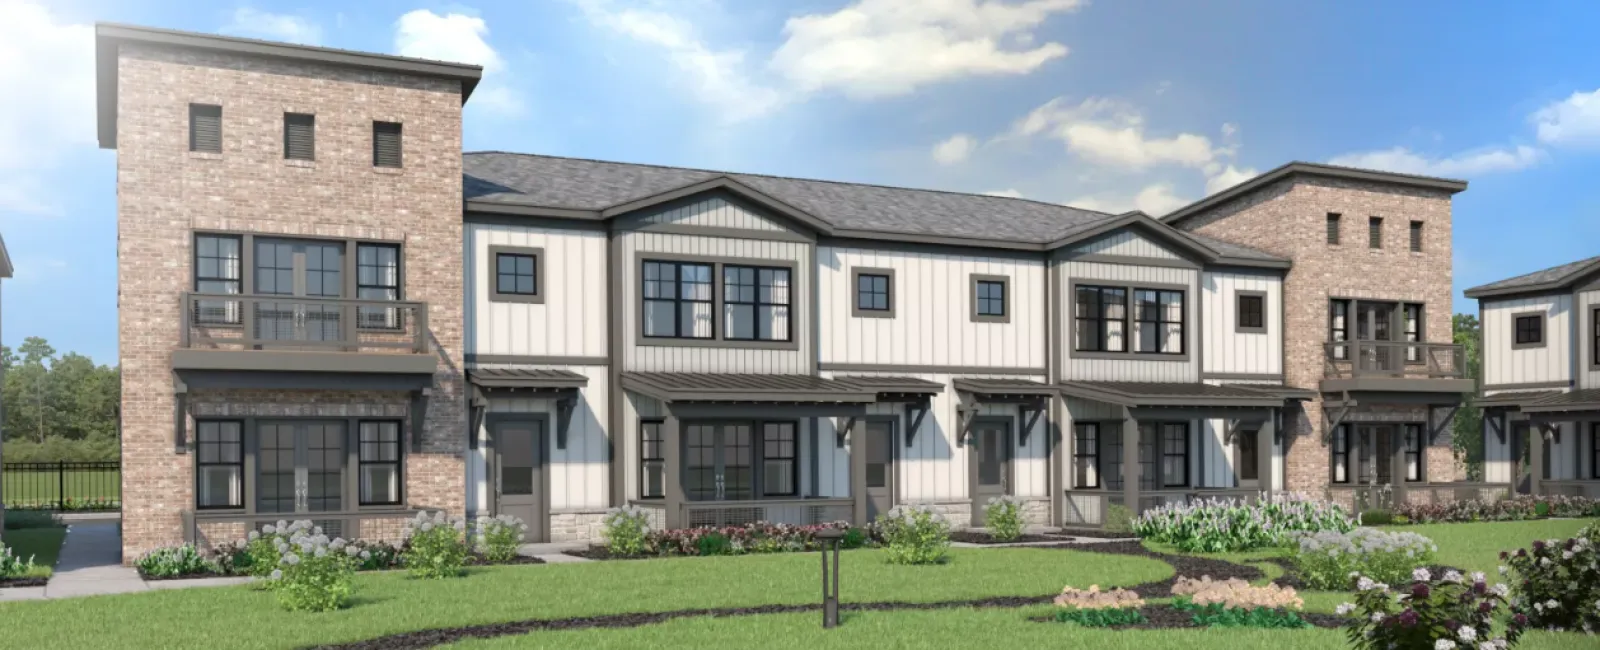 Serenity Townhome Plan Delivers Optimized Hapeville Living